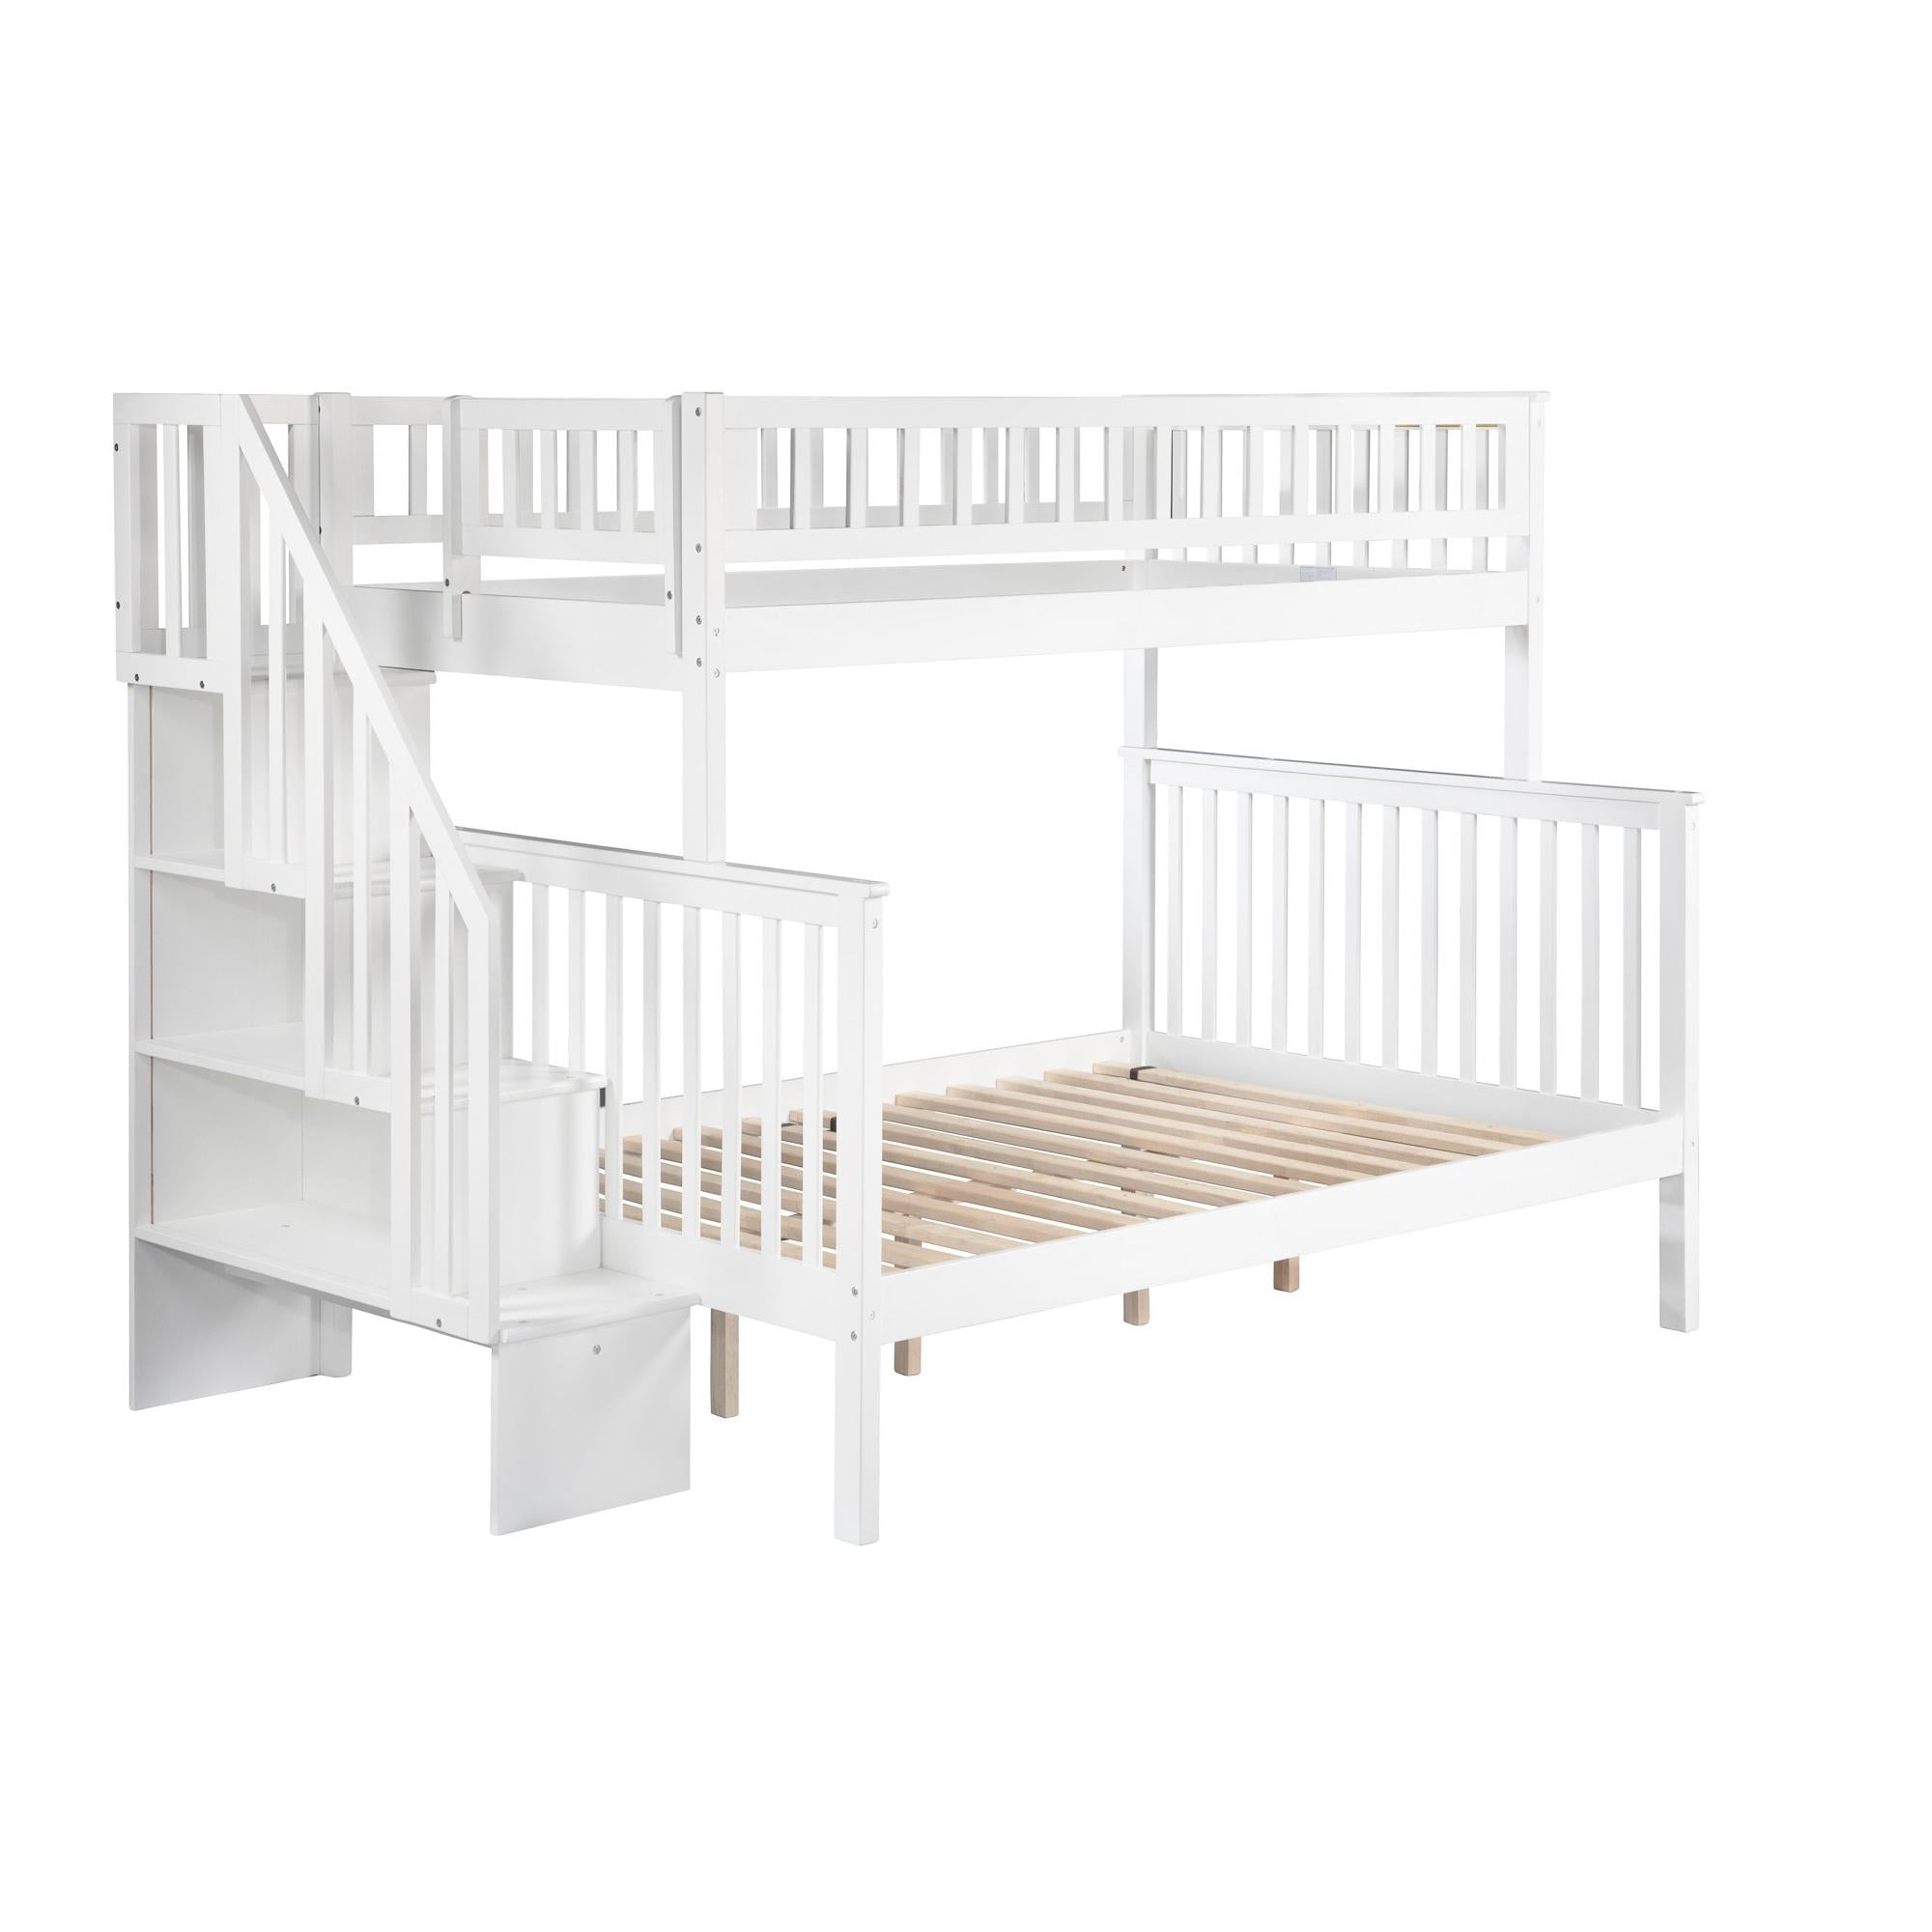 Picture of Atlantic Furniture AB56702 Woodland Staircae Bunk Bed, White - Twin & Full